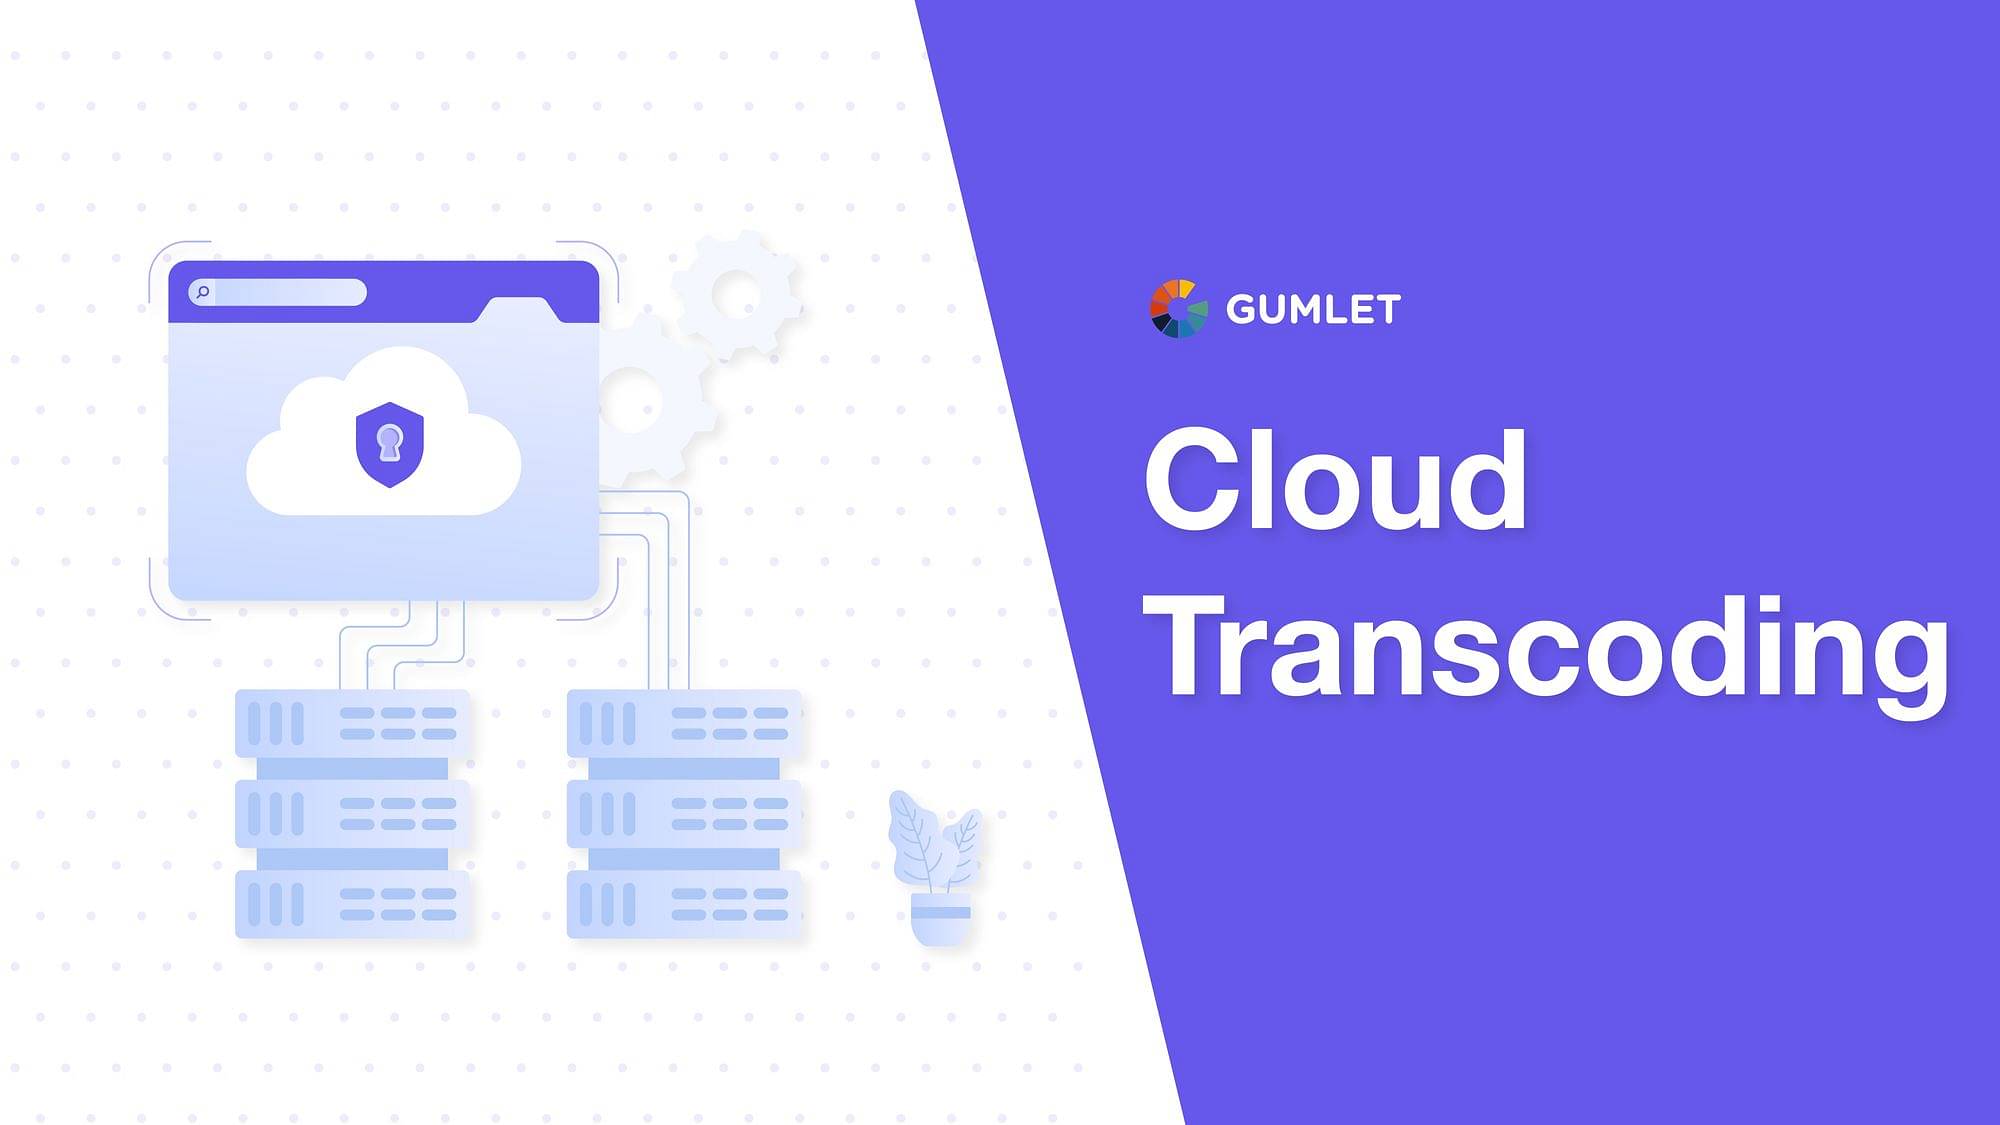 Overview on Cloud Transcoding